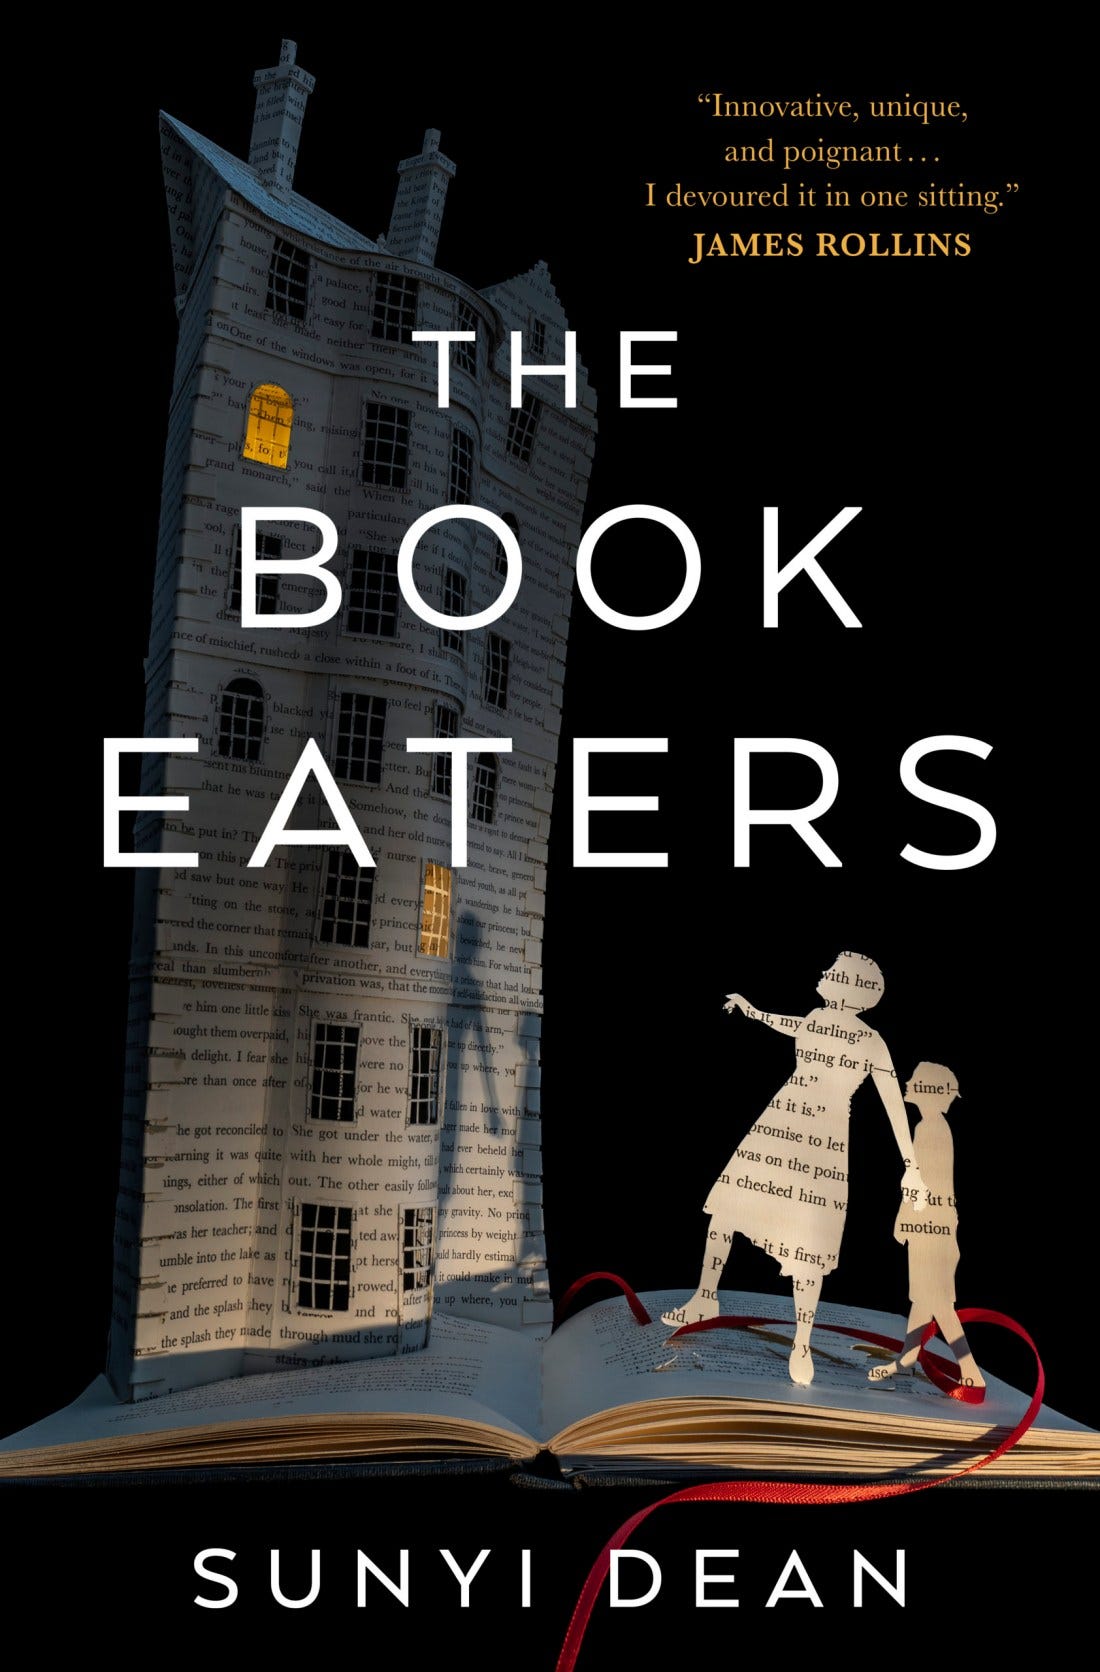 The Book Eaters by Sunyi Dean | Goodreads